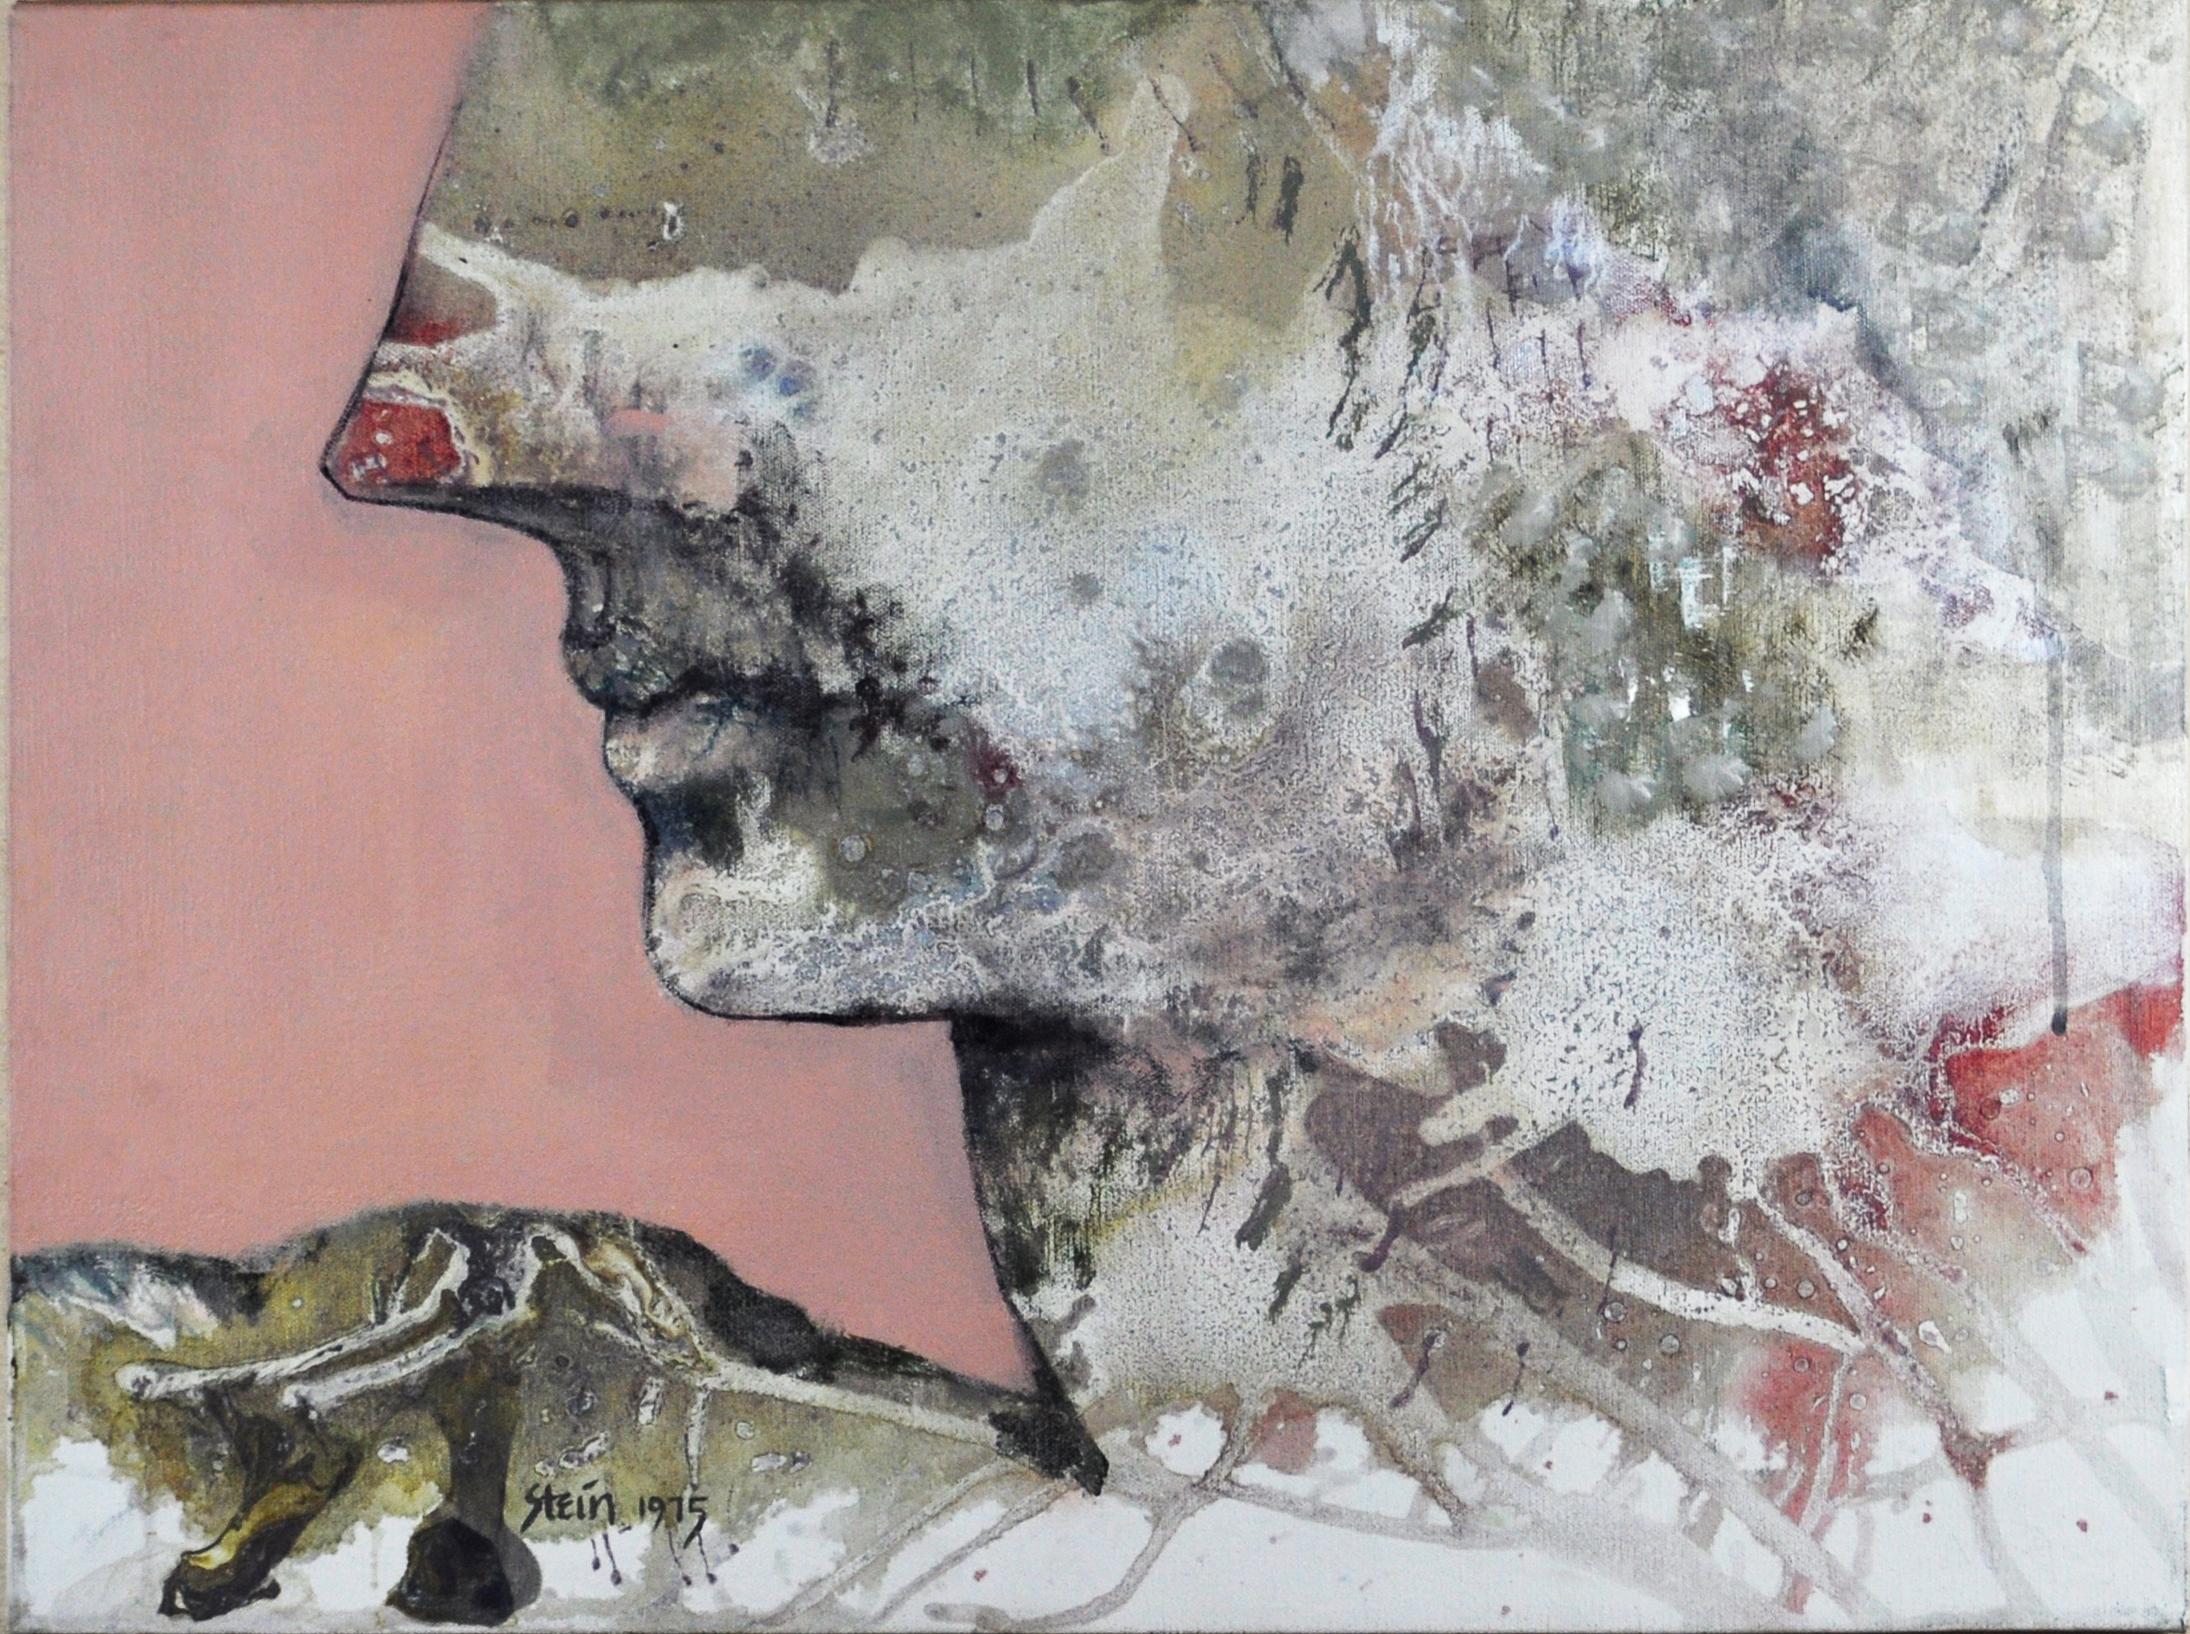 Linda Stein, Profile Landscape 438.057 - Signed Feminist LGBTQ+ Acrylic on Canvas Painting

Profile Landscape 438.057 is from Linda Stein's Profiles series--drawings, collages and paintings of facial profiles she made in the 1960s and 1970s when she